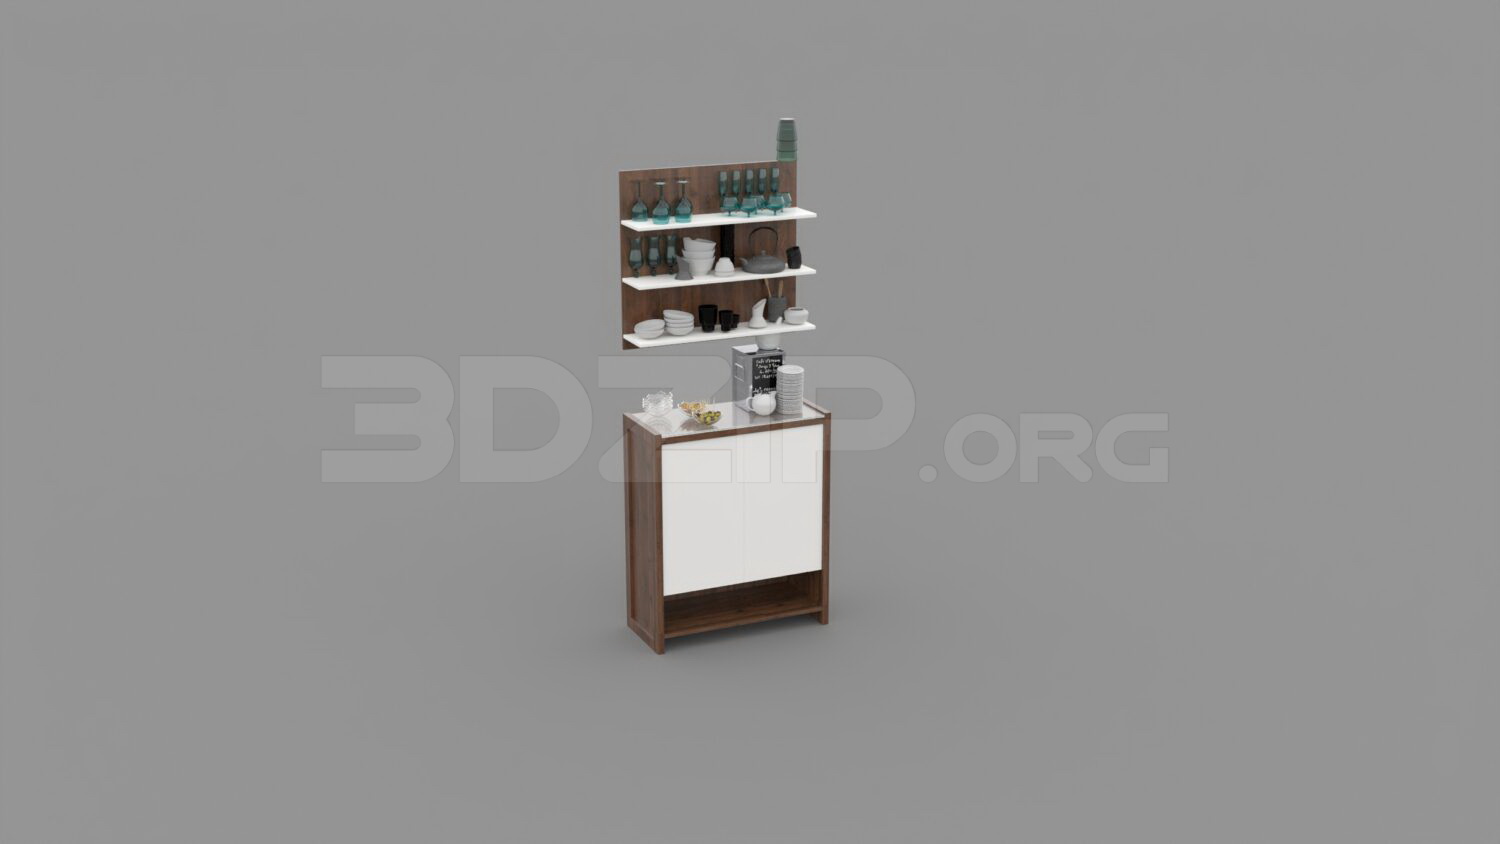 1346. Download Free Shoe Cabinet Model By Huy Hieu Lee